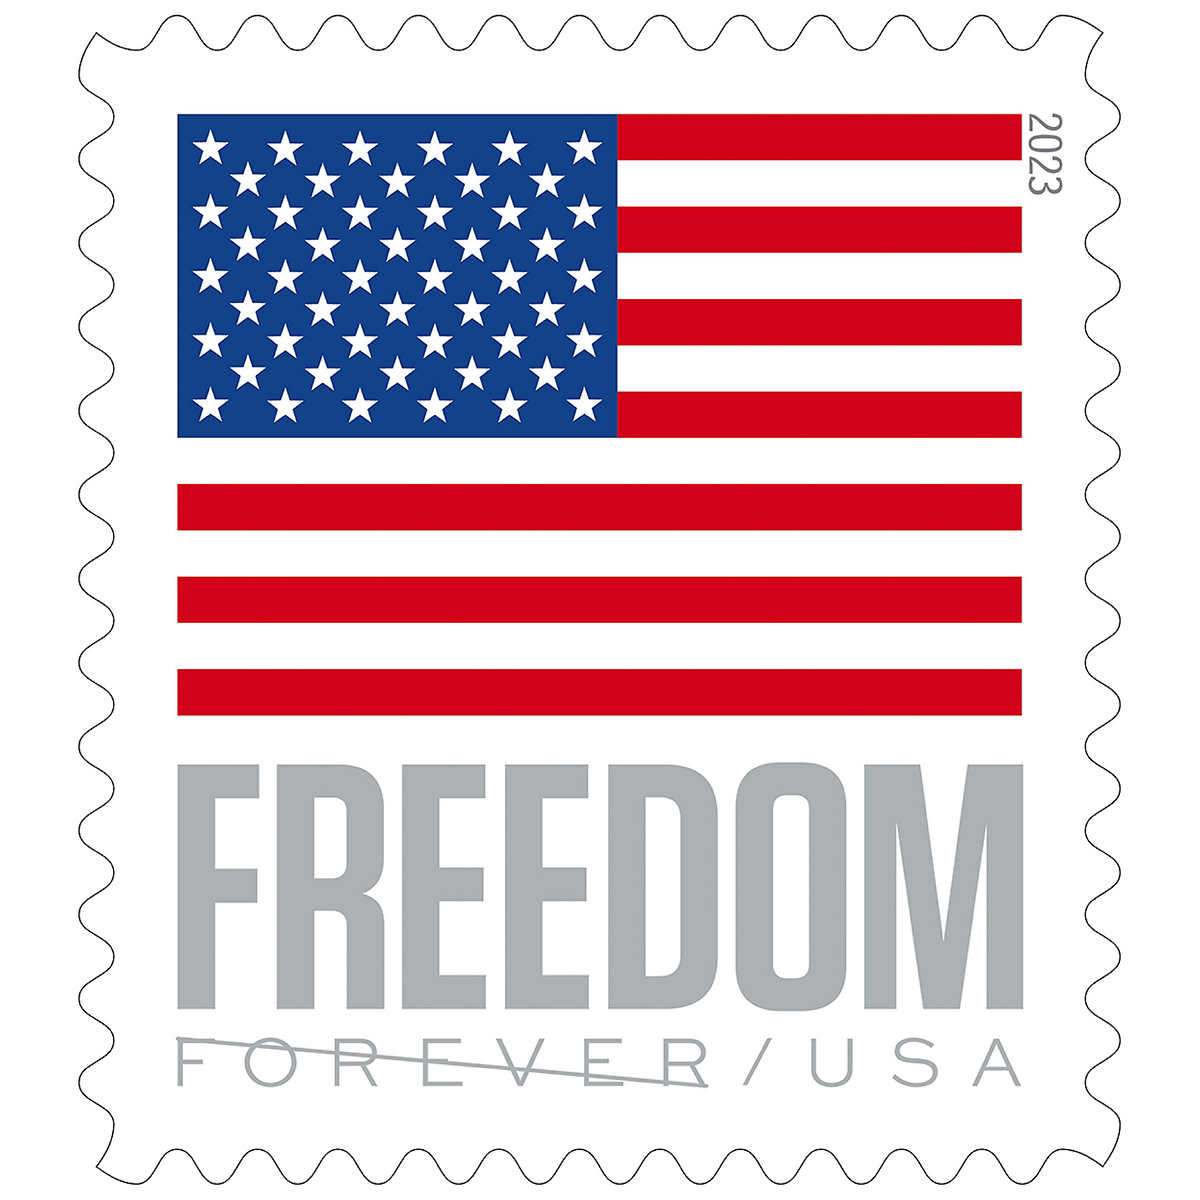 40 USPS Thank You Forever Stamps 2 sheets of 2040 stamps total